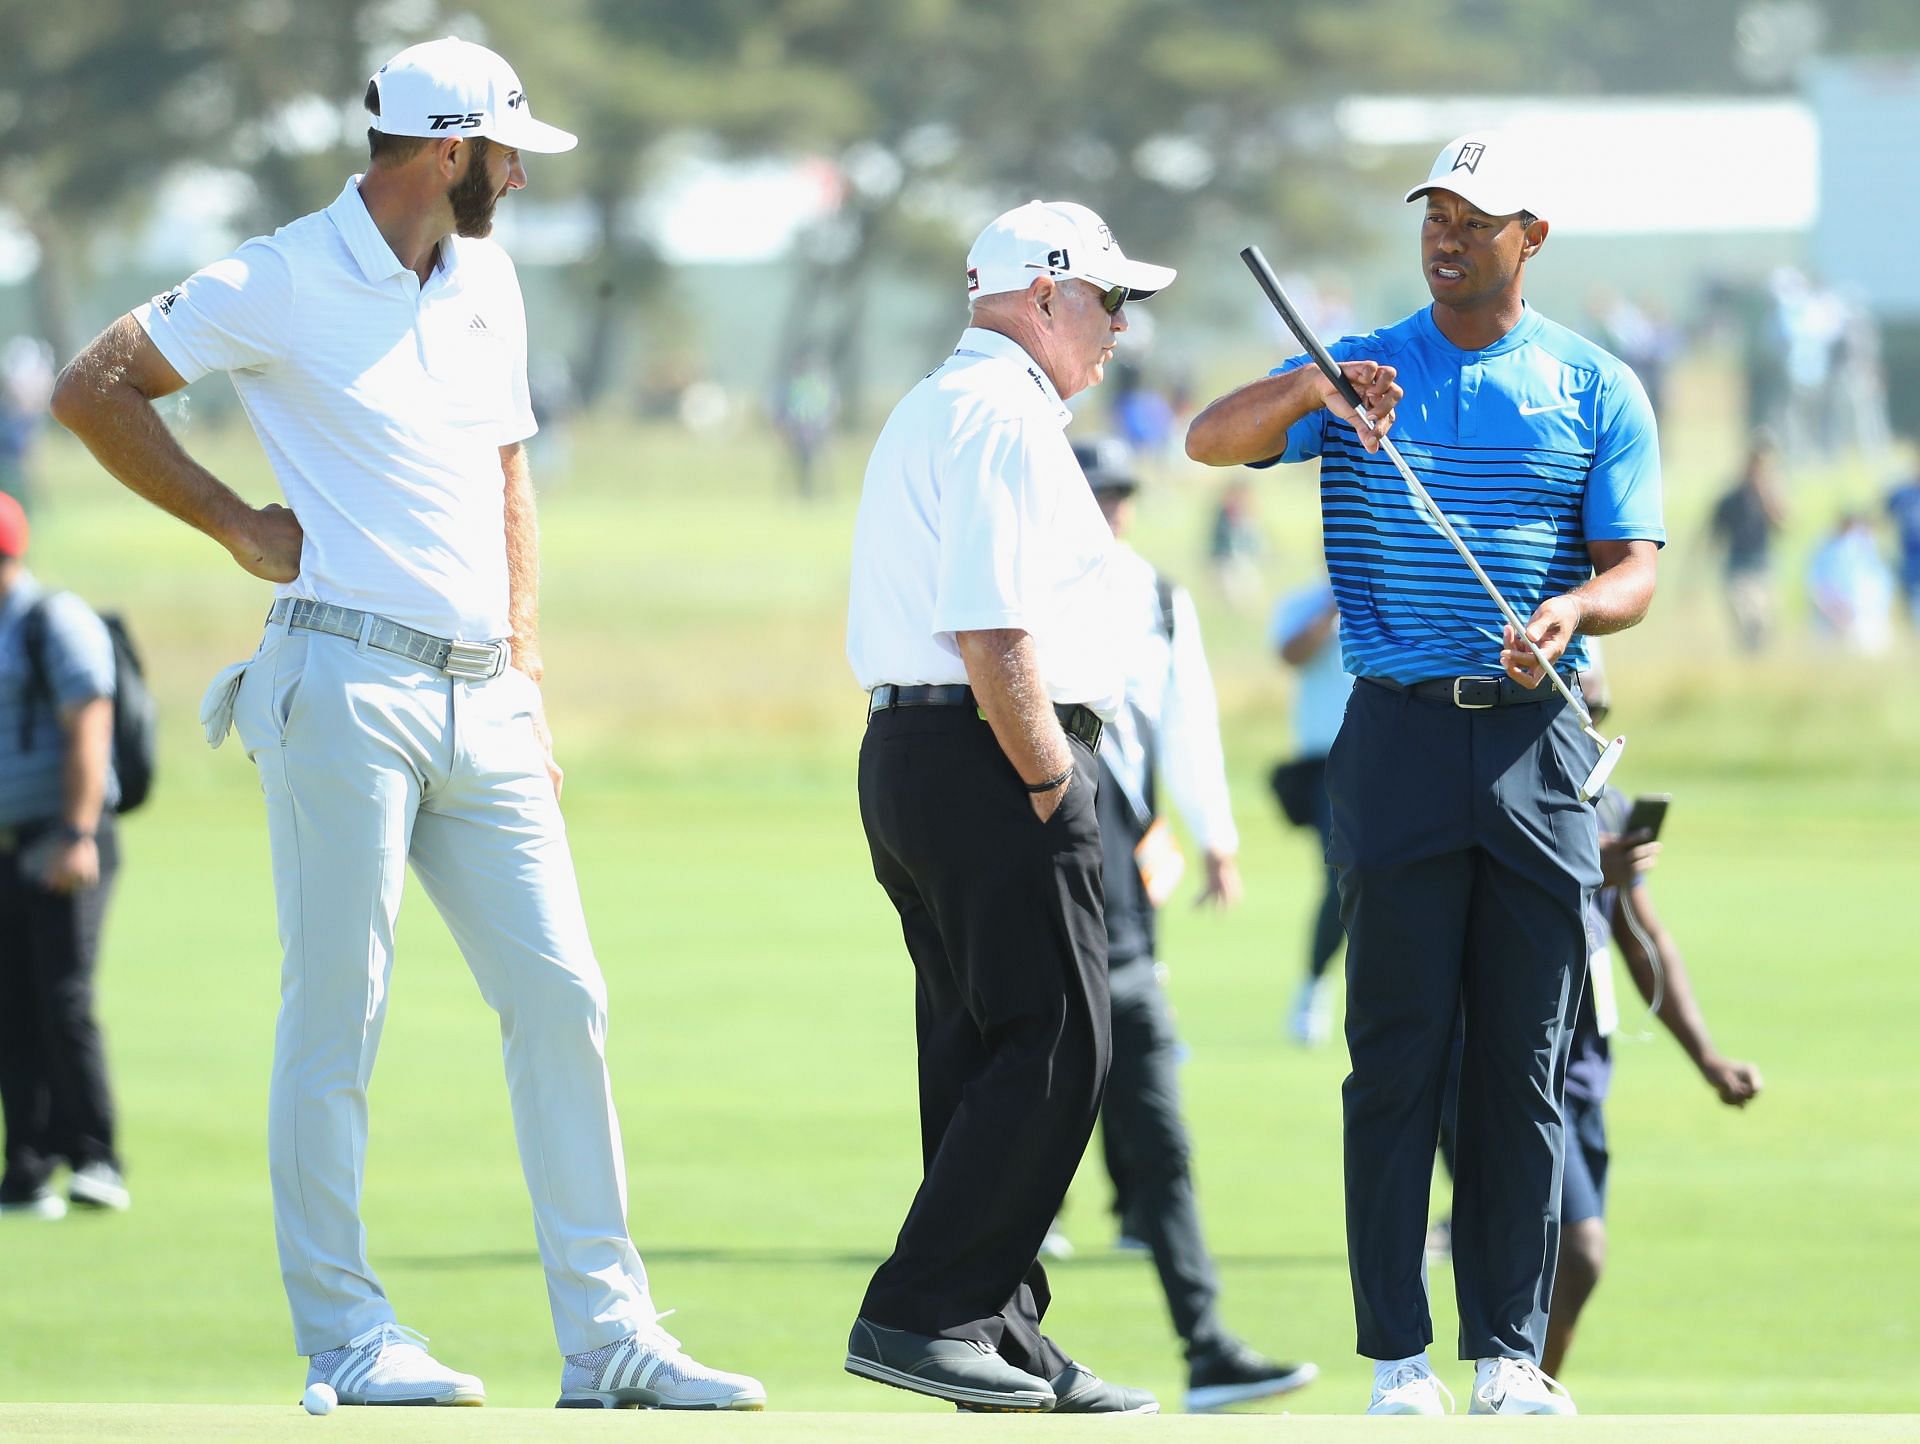 Butch Harmon and Tiger Woods. 2018 U.S. Open (Image via Getty).